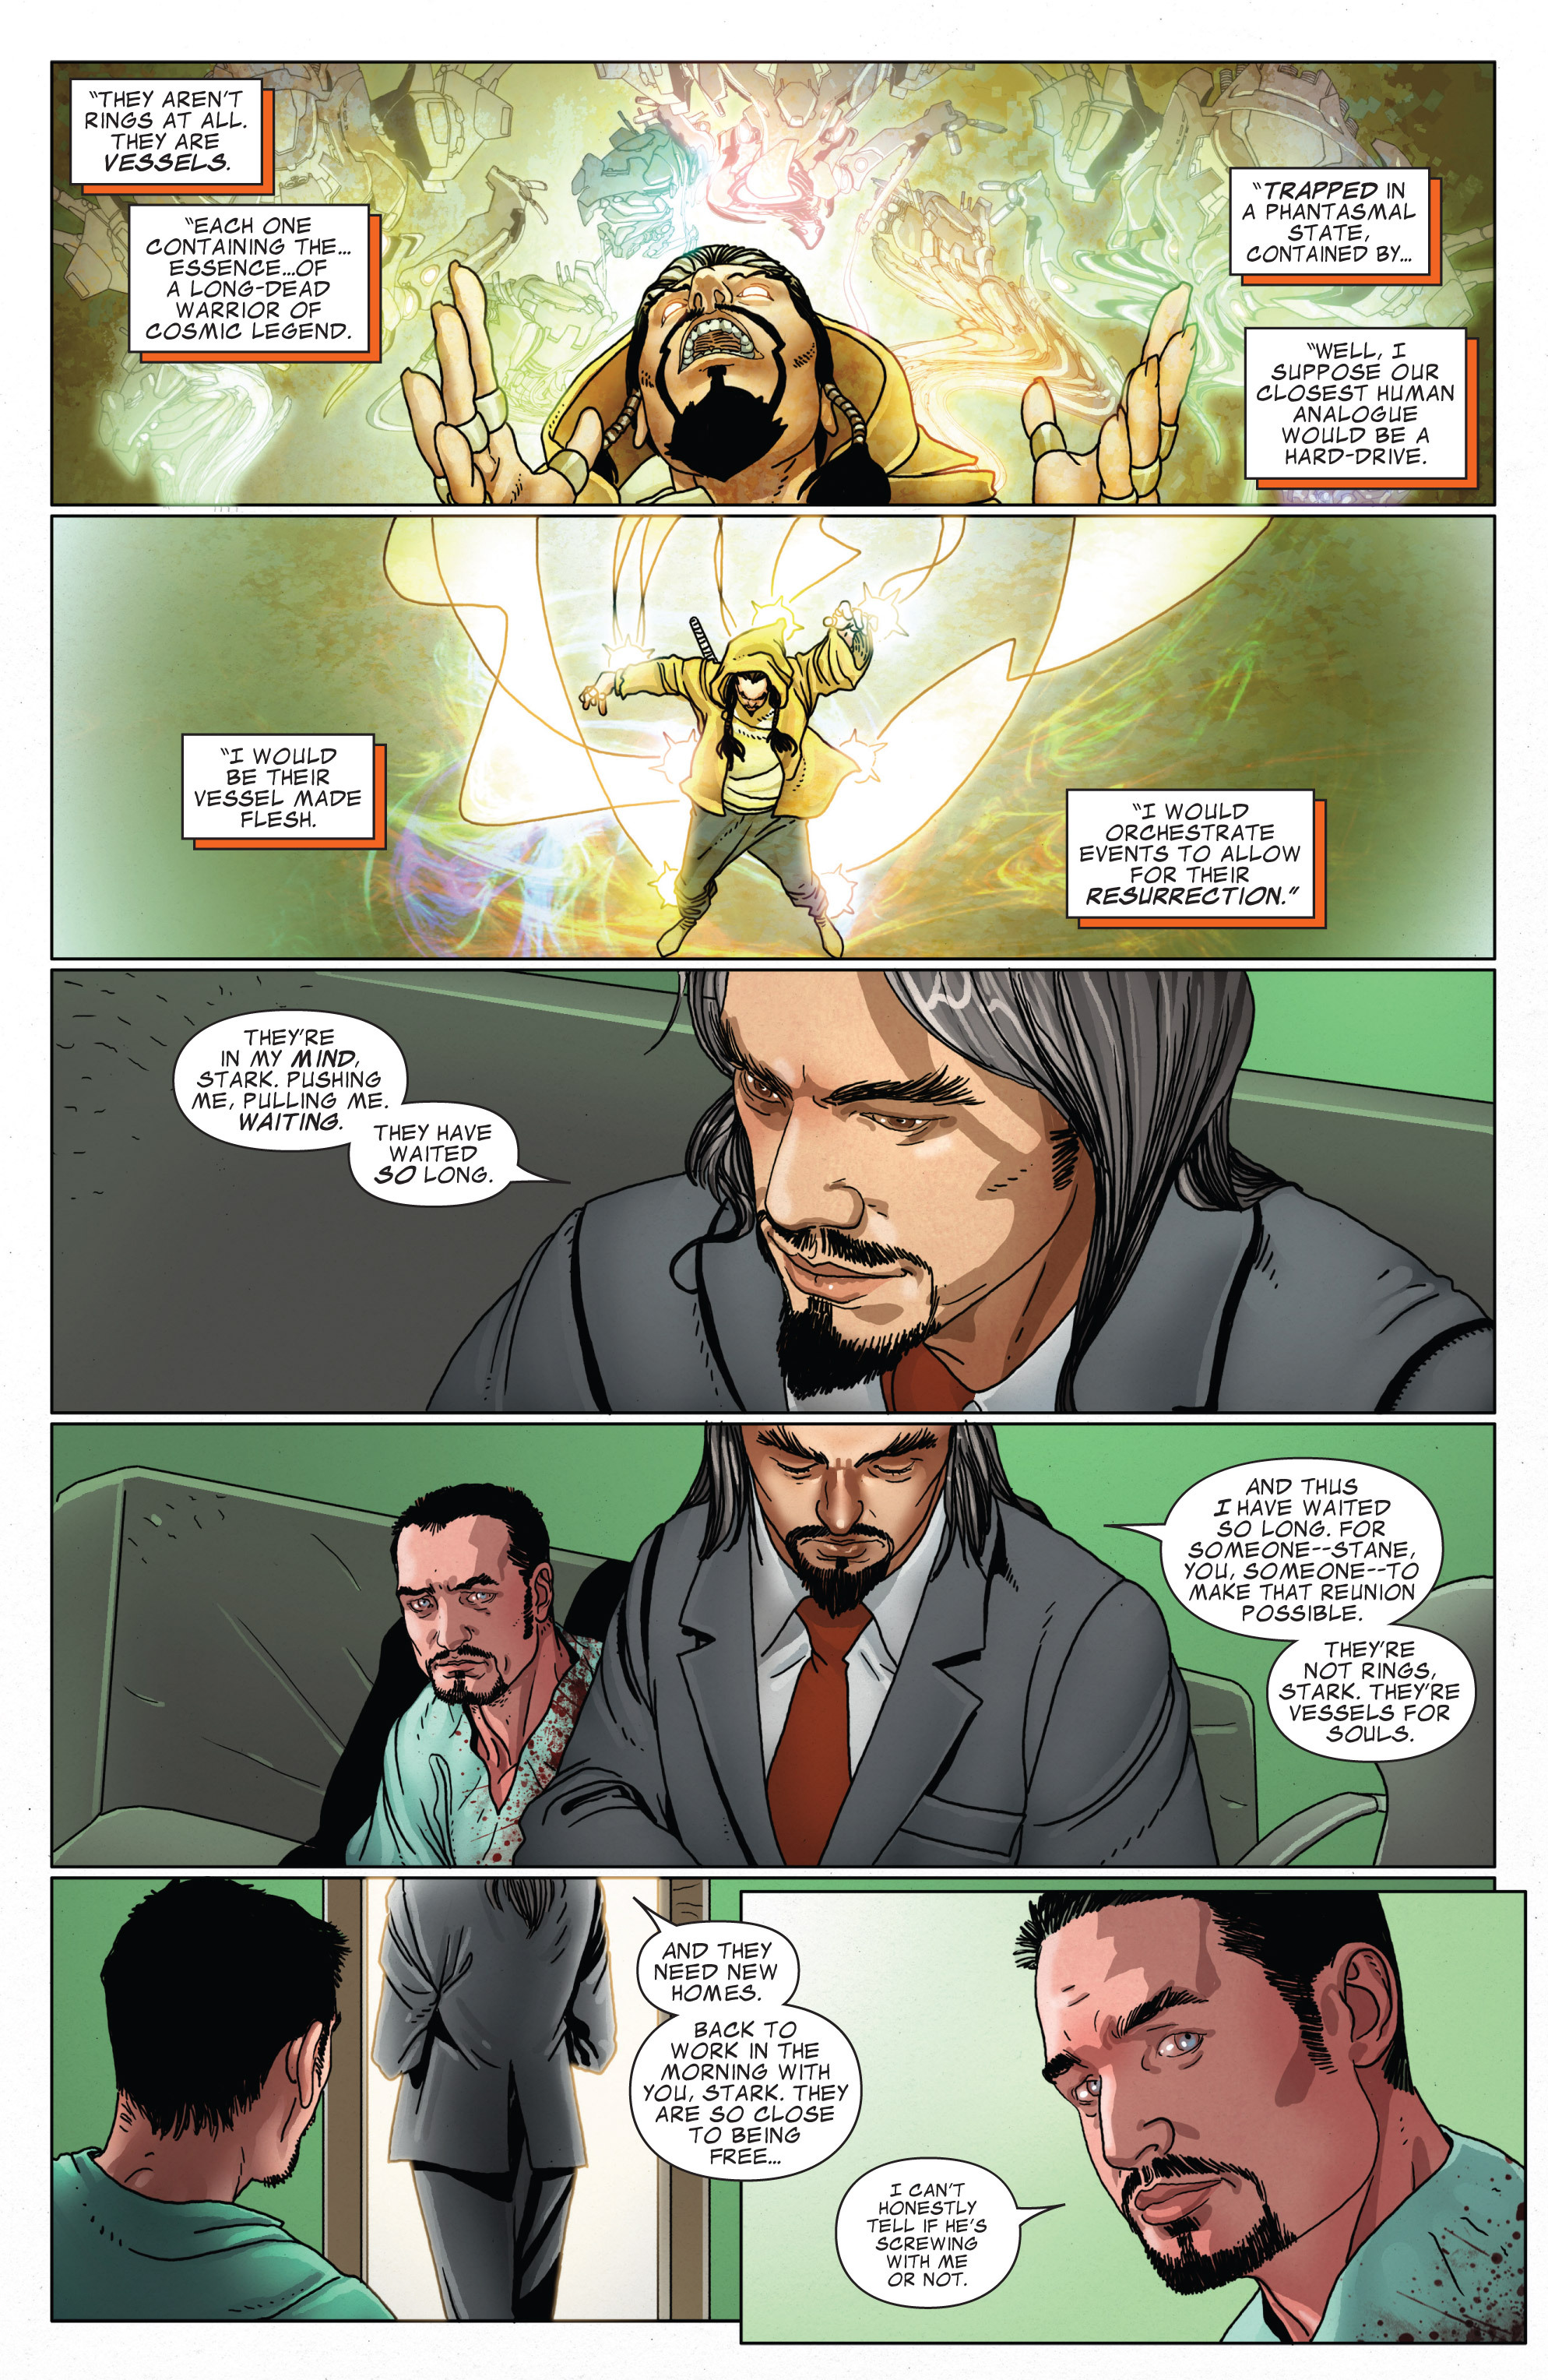 Invincible Iron Man (2008) 522 Page 13